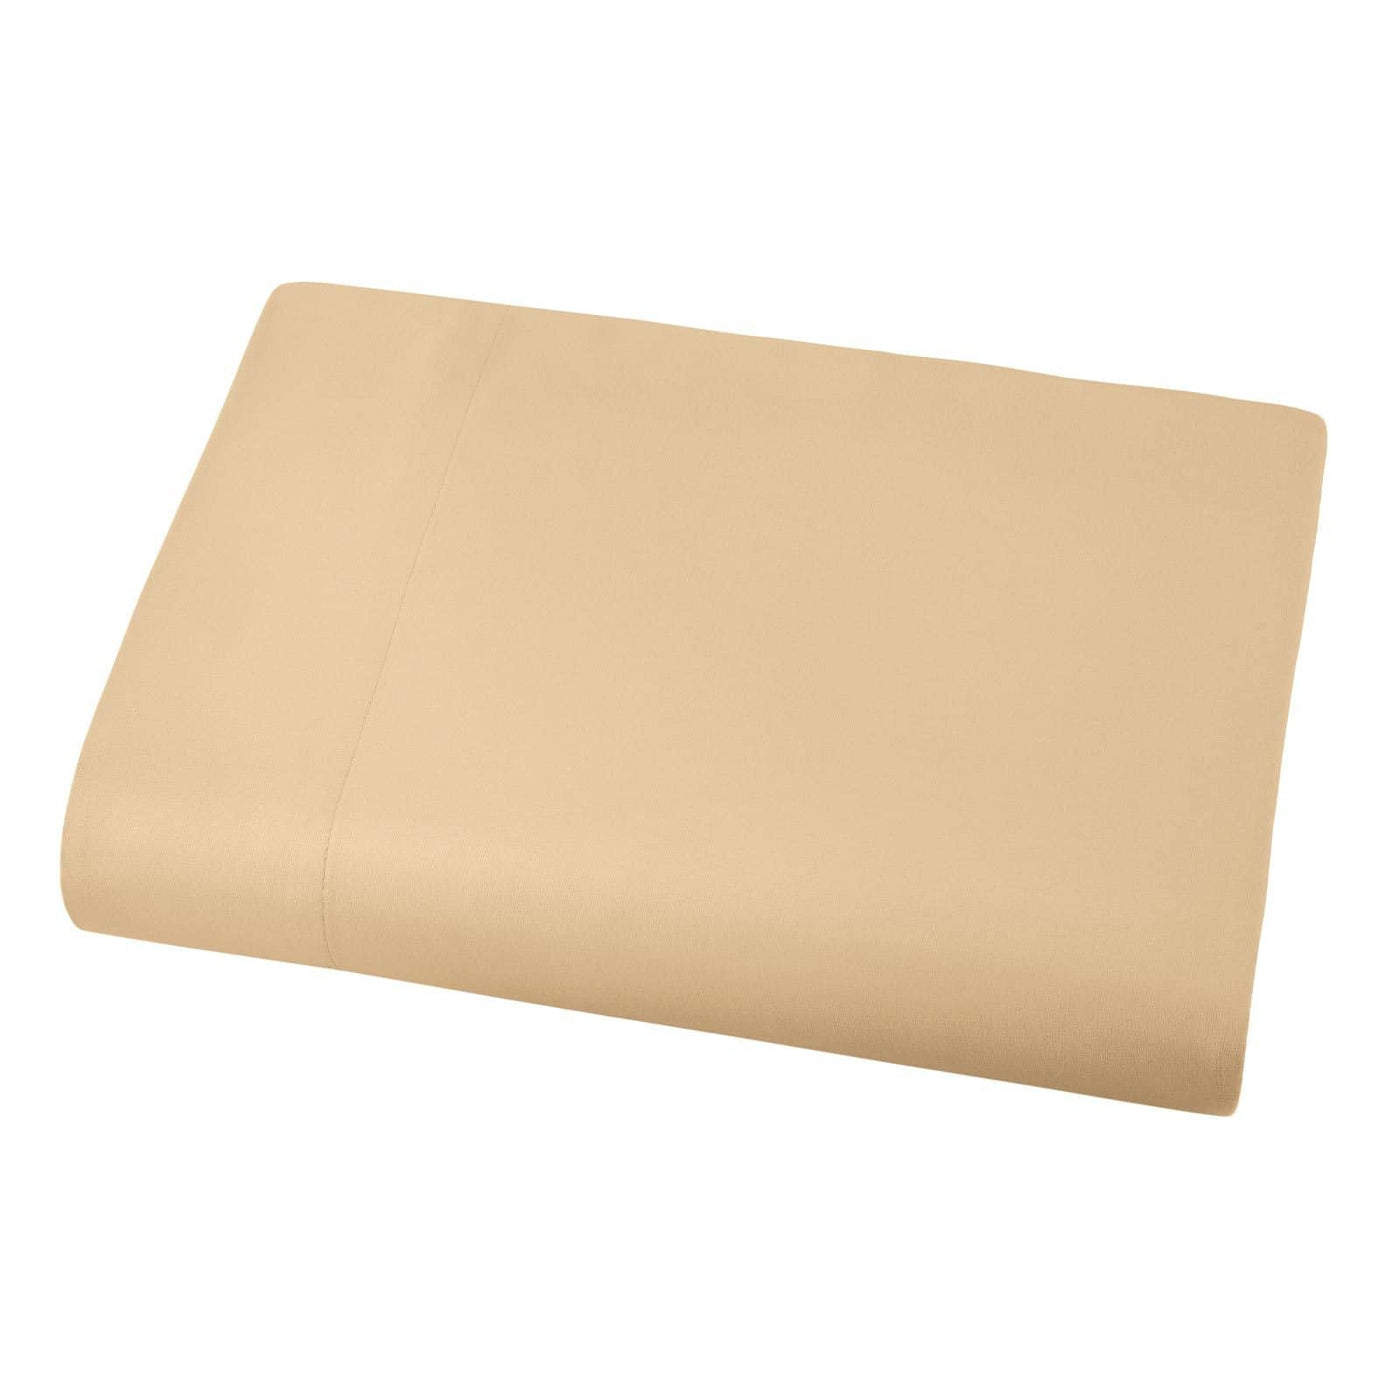 Soft and Luxurious Over-sized Flat Sheet 132 in x 110 in by Vilano springs in Gold#color_vilano-gold